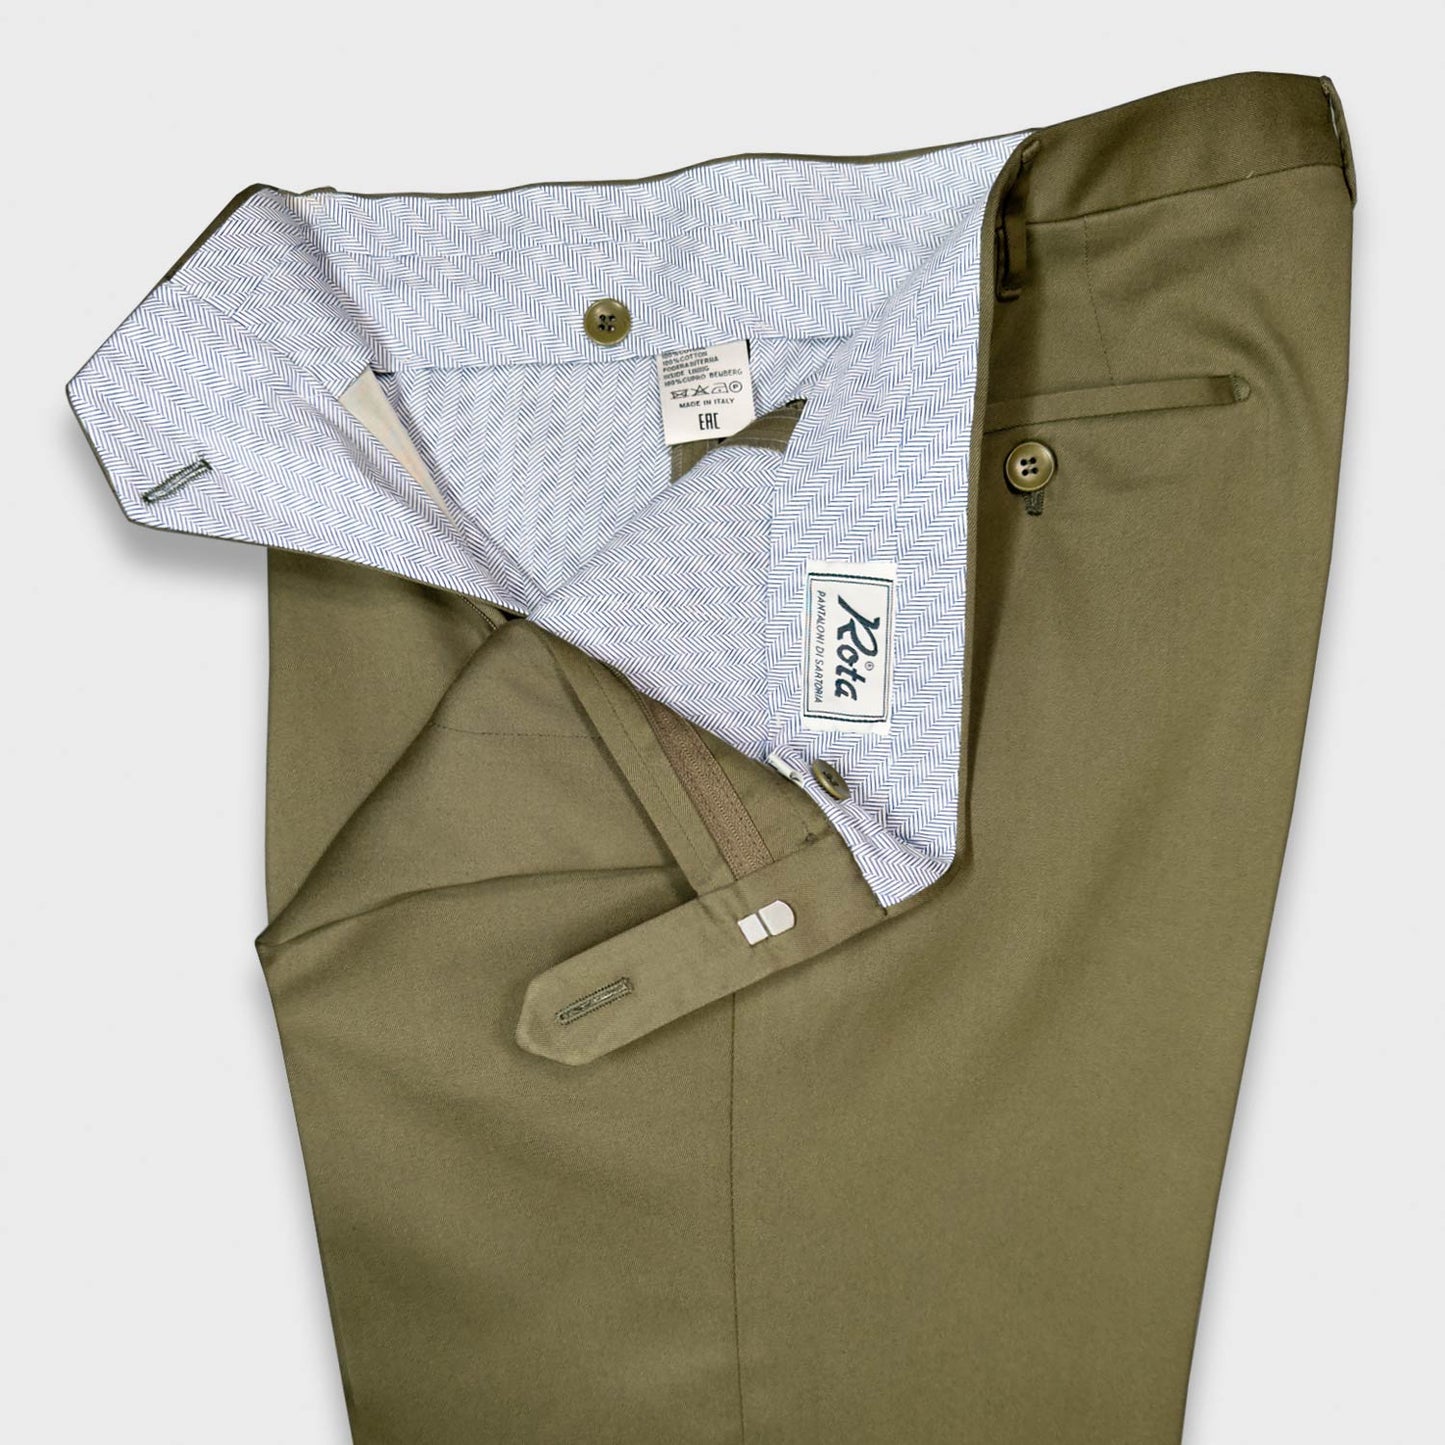 Army Green Tailored Trousers Cotton Twill Double Pleats. Tailored cotton trousers double pleats army green color, handmade in Italy by Rota Pantaloni, made with luxury cotton twill British fabric made by Brisbane Moss, high rise classic fit, four pockets